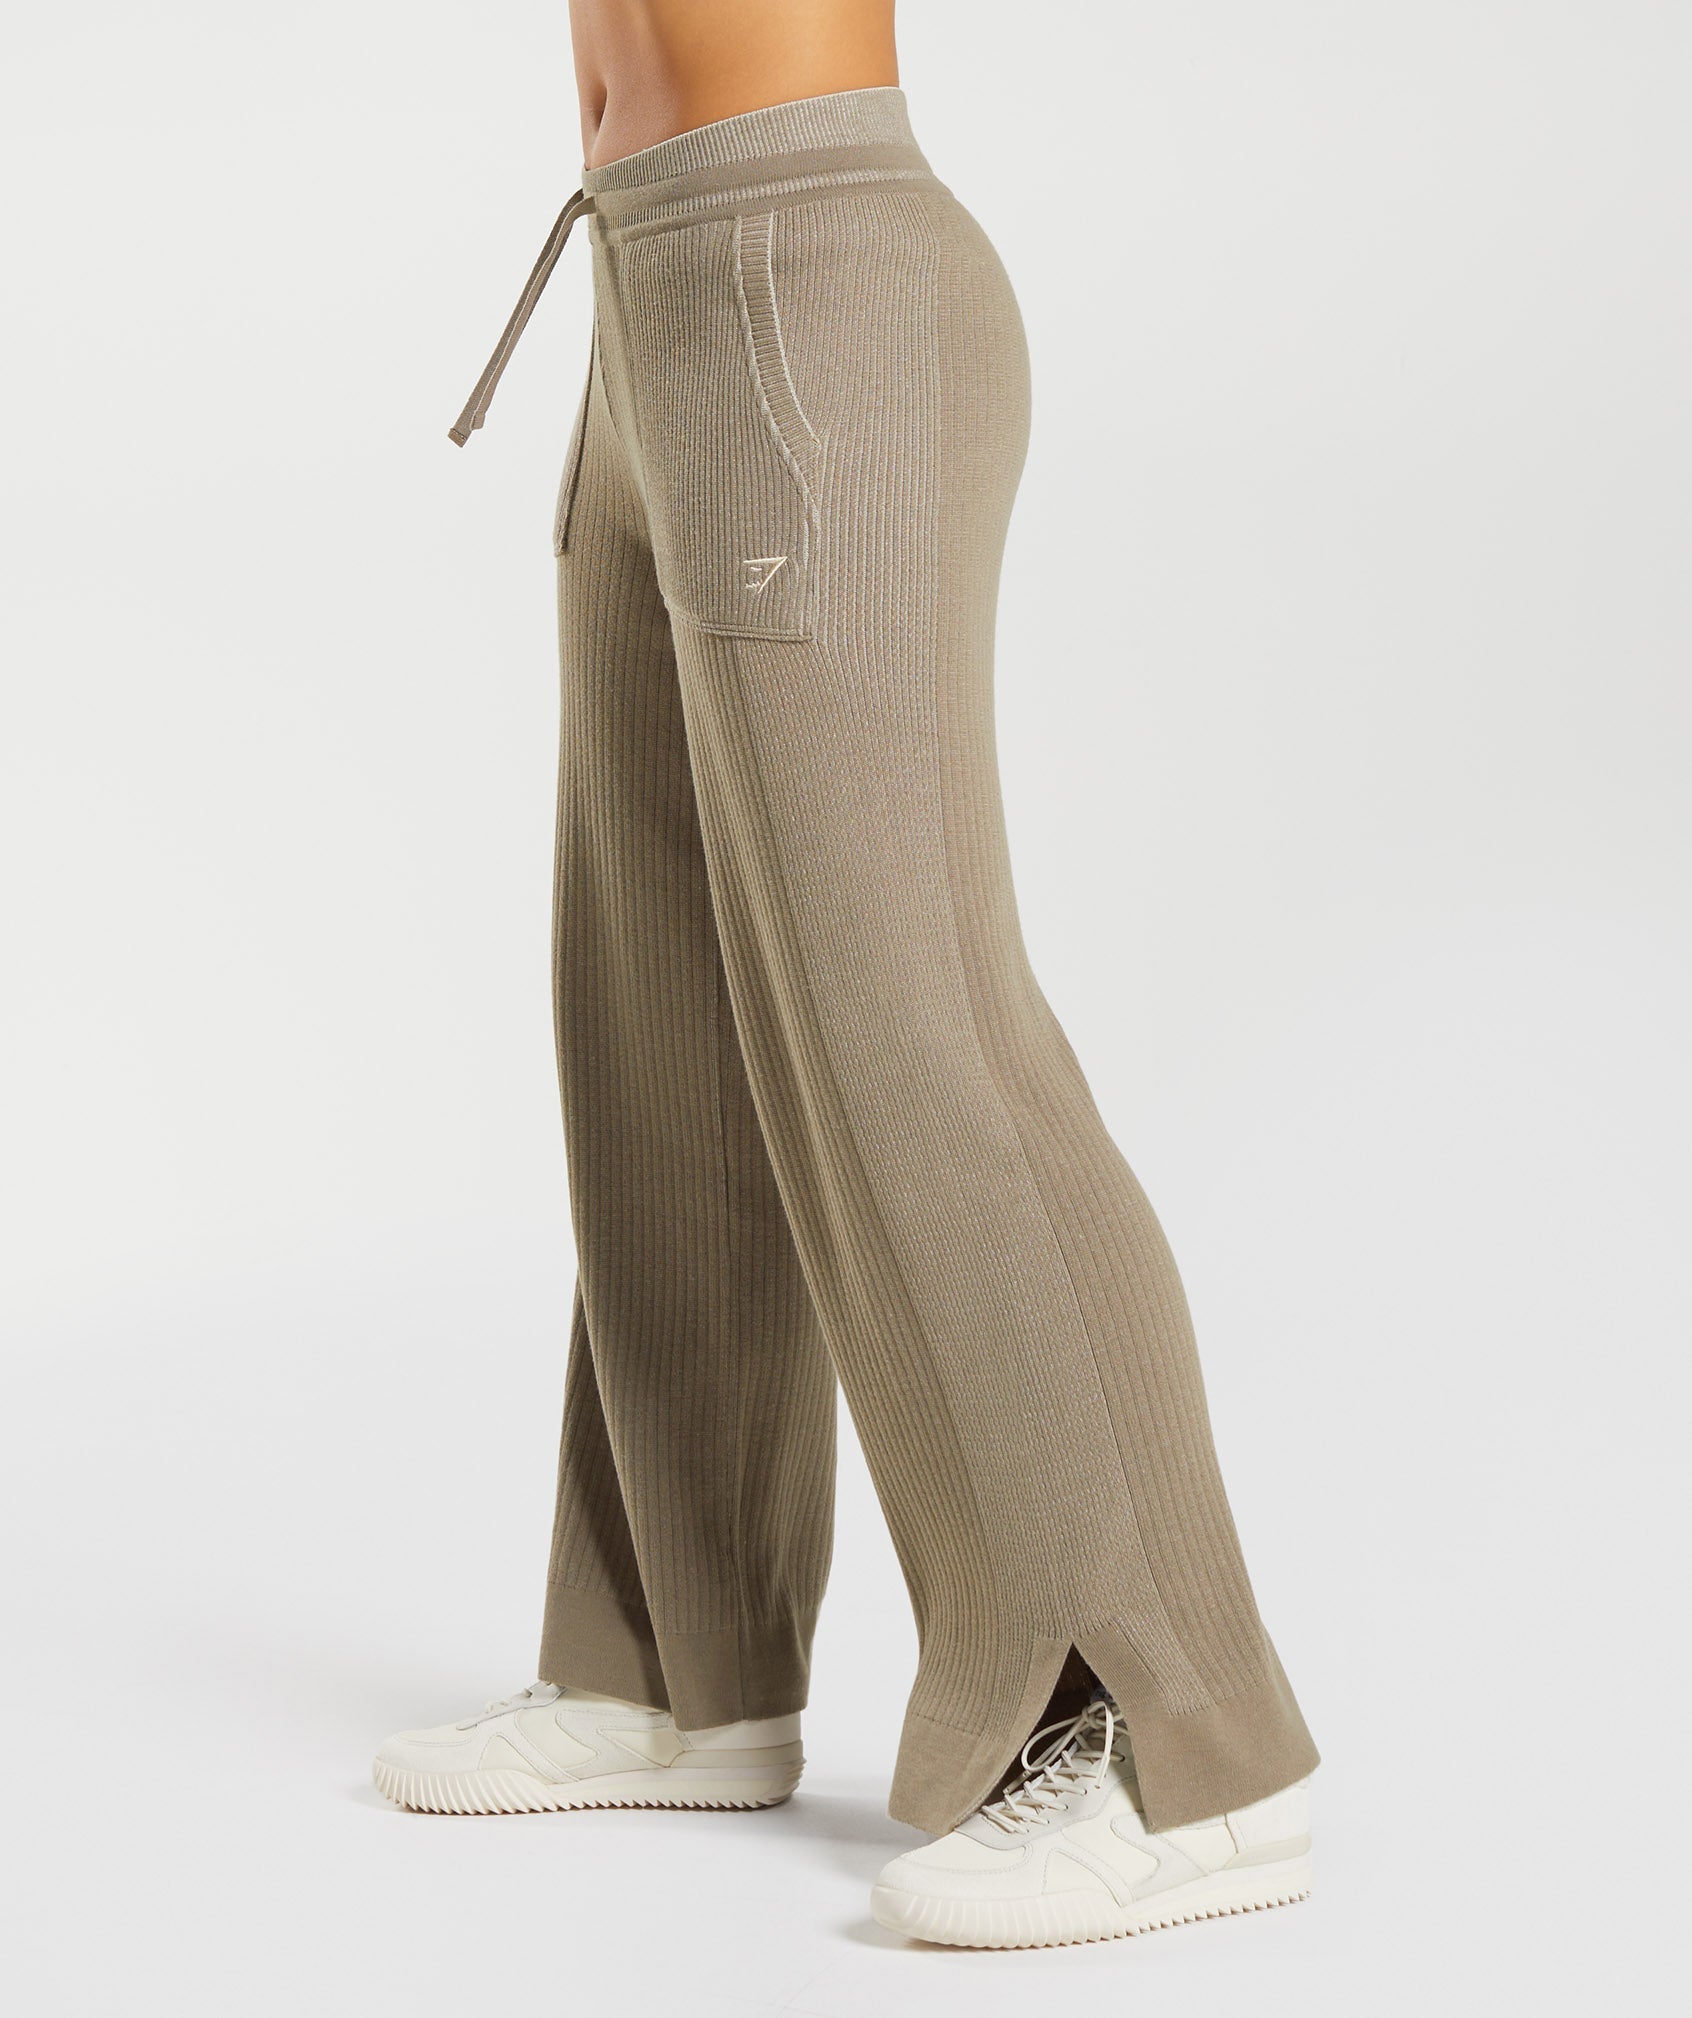 Pause Knitwear Joggers in Cement Brown/Pebble Grey